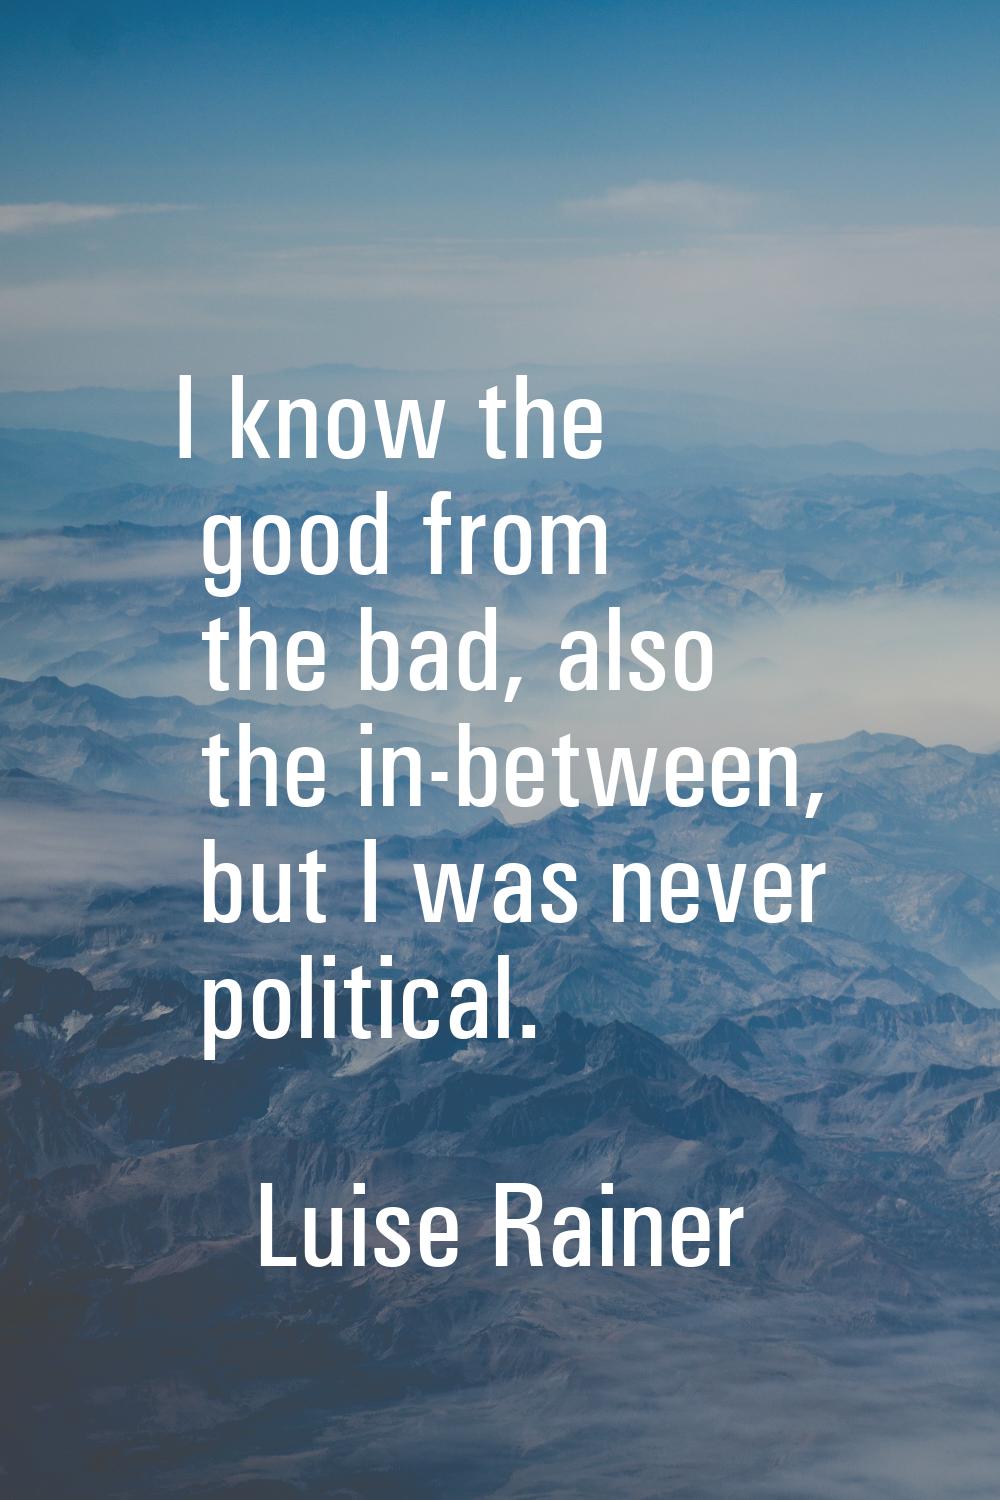 I know the good from the bad, also the in-between, but I was never political.